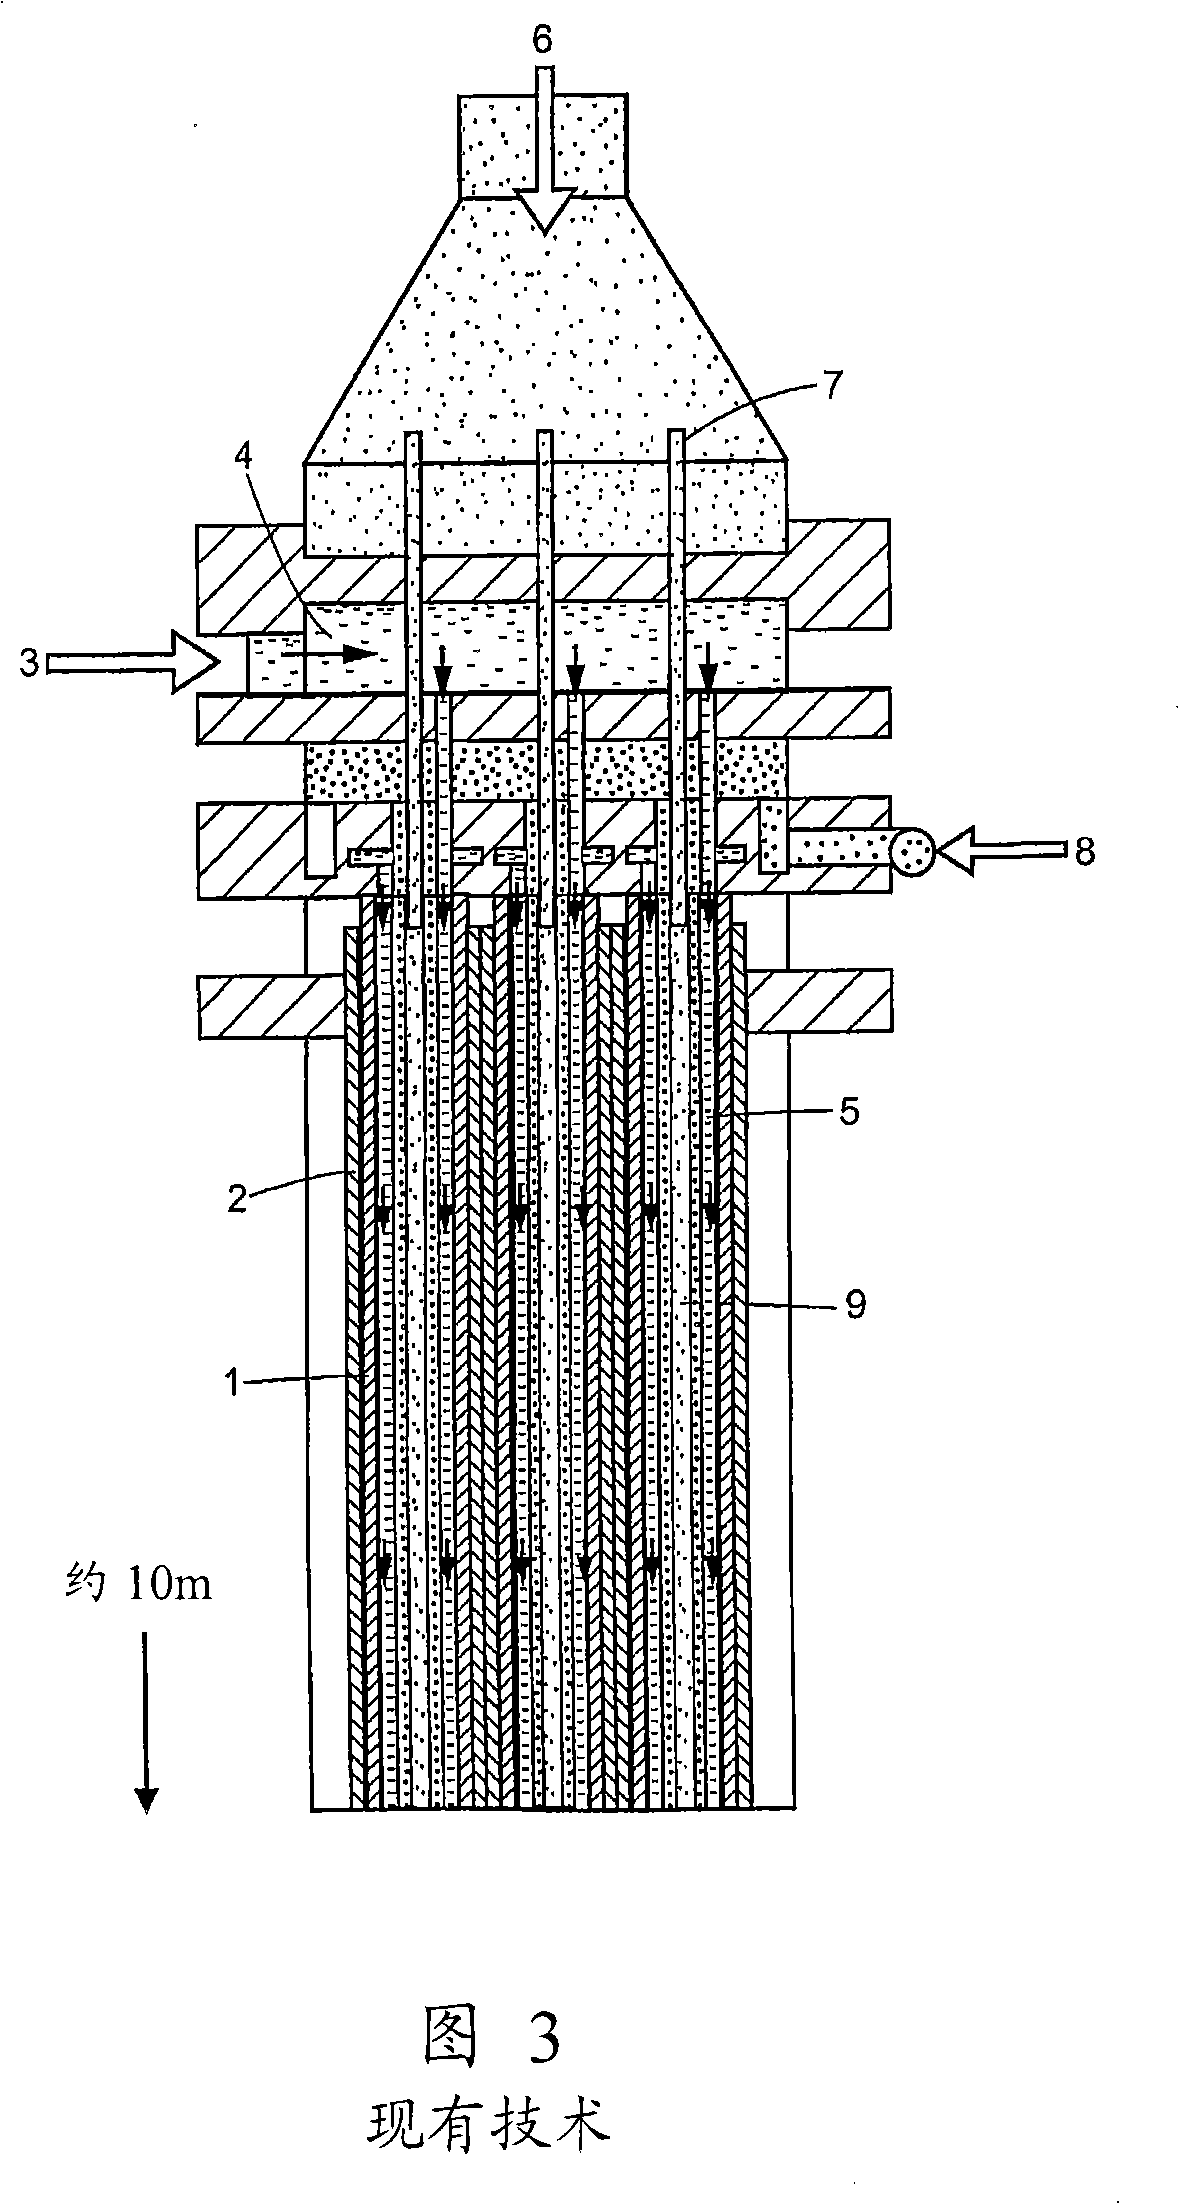 Method and device for the sulfonation or sulfation of sulfonatable or sulfatable organic substances and for preforming faster, strongly exothermic gas7liquid reactions